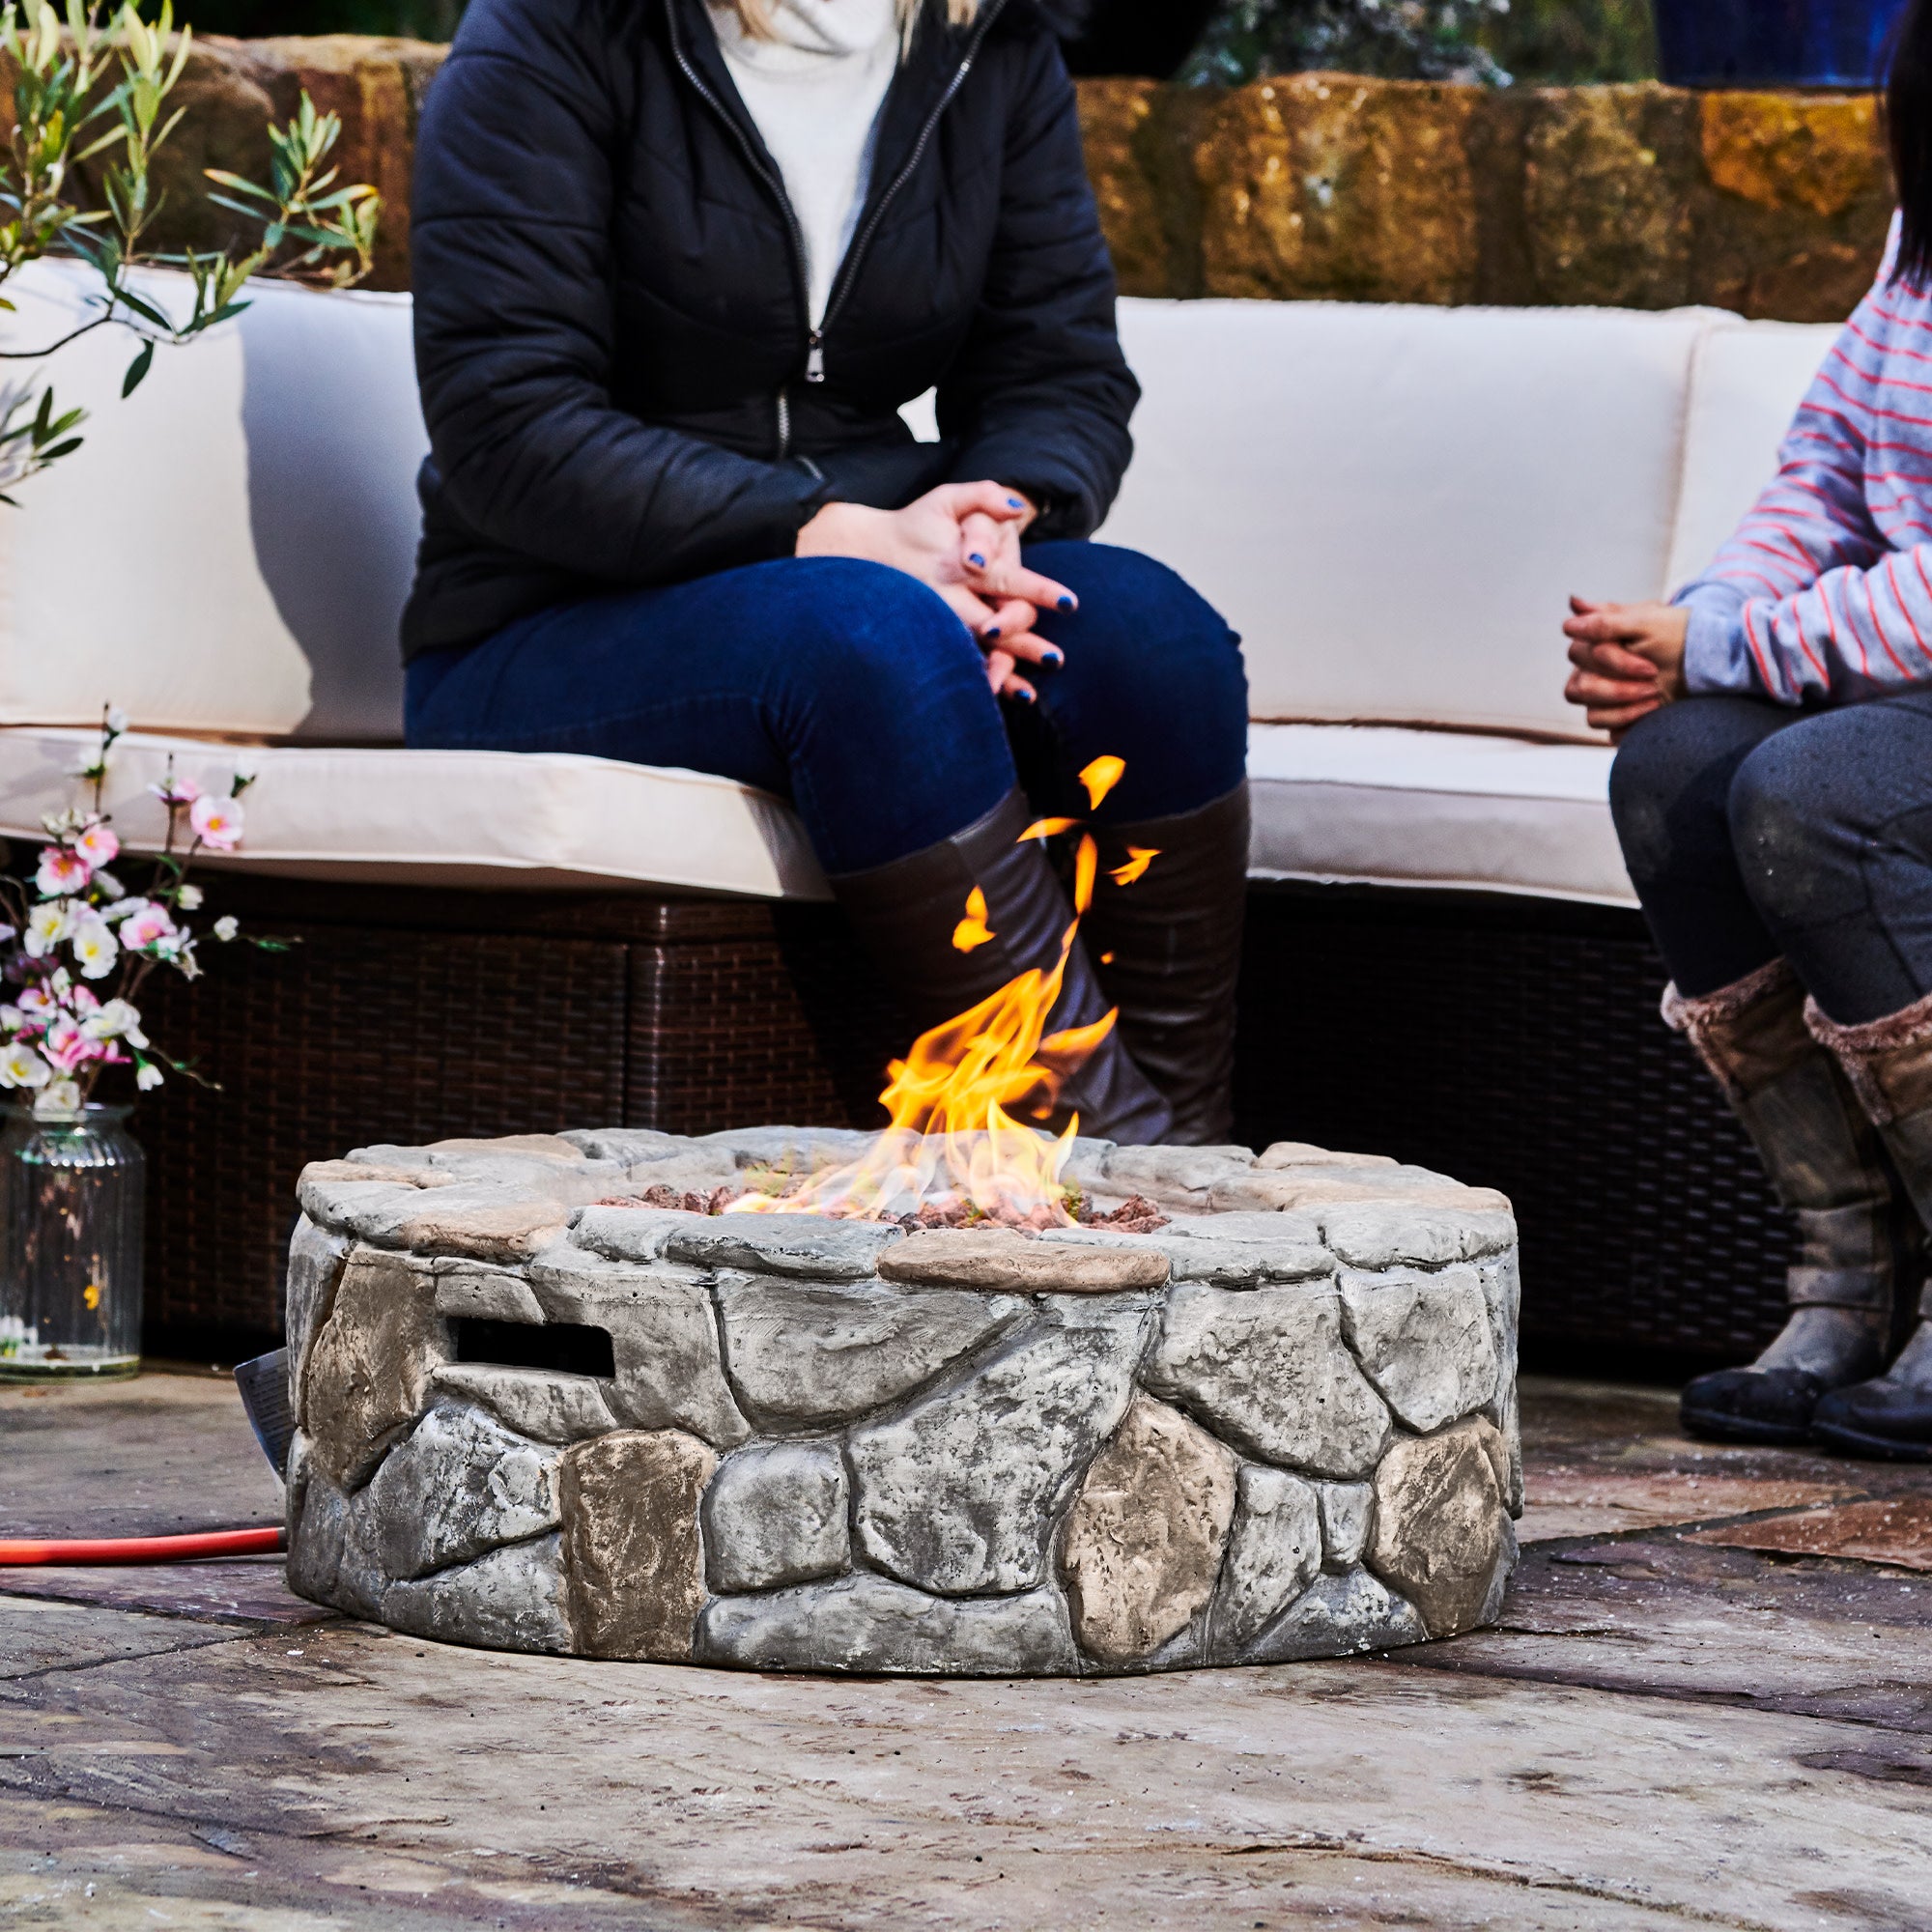 Teamson Home 28" Outdoor Round Stone Propane Gas Fire Pit, Stone Gray